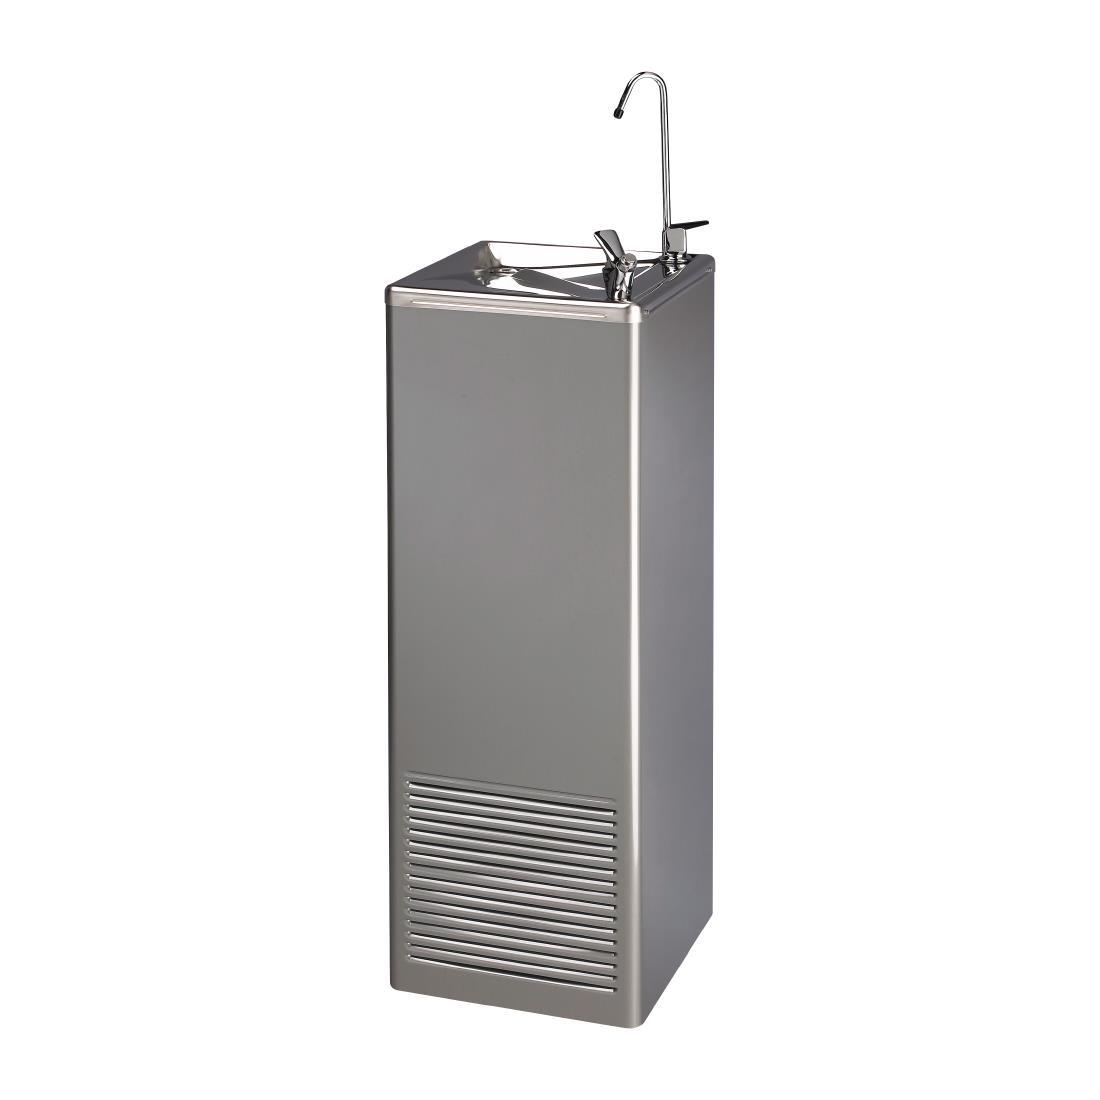 Cosmetal River Freestanding Water Fountain with Installation - FC856  - 1